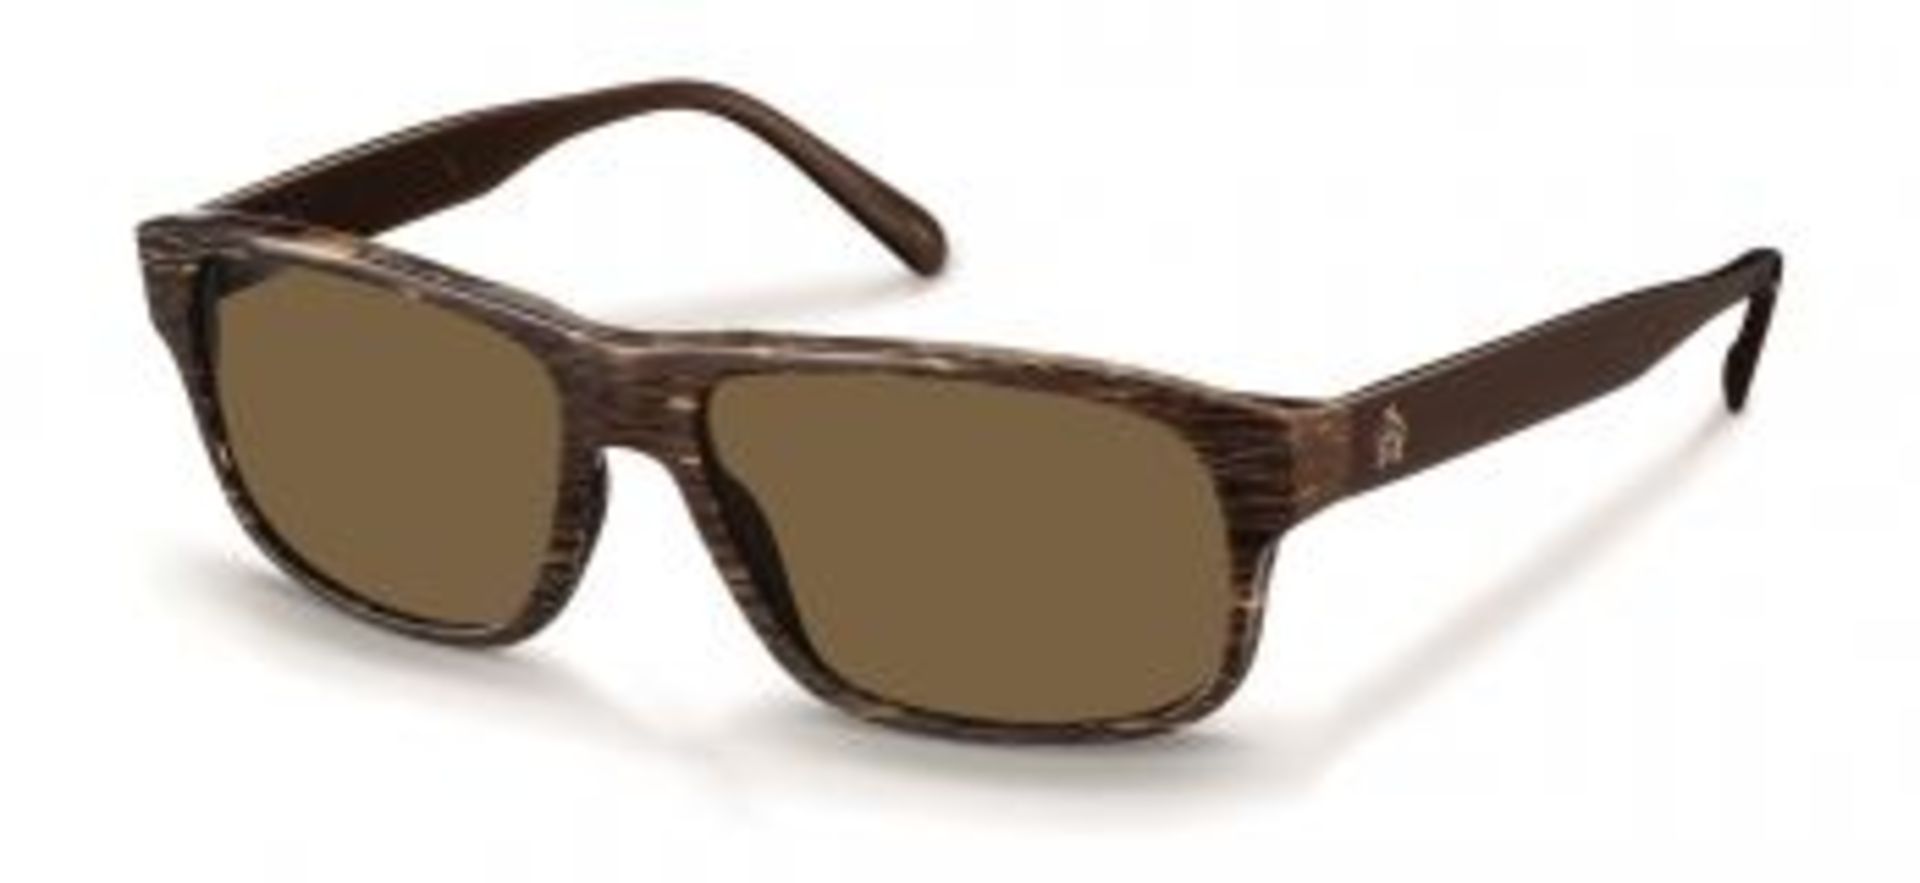 Brand New Pair Of Mens Dunhill Sunglasses - Brown Plastic Frame With Brown Lens RRP: £145.00 D7006-